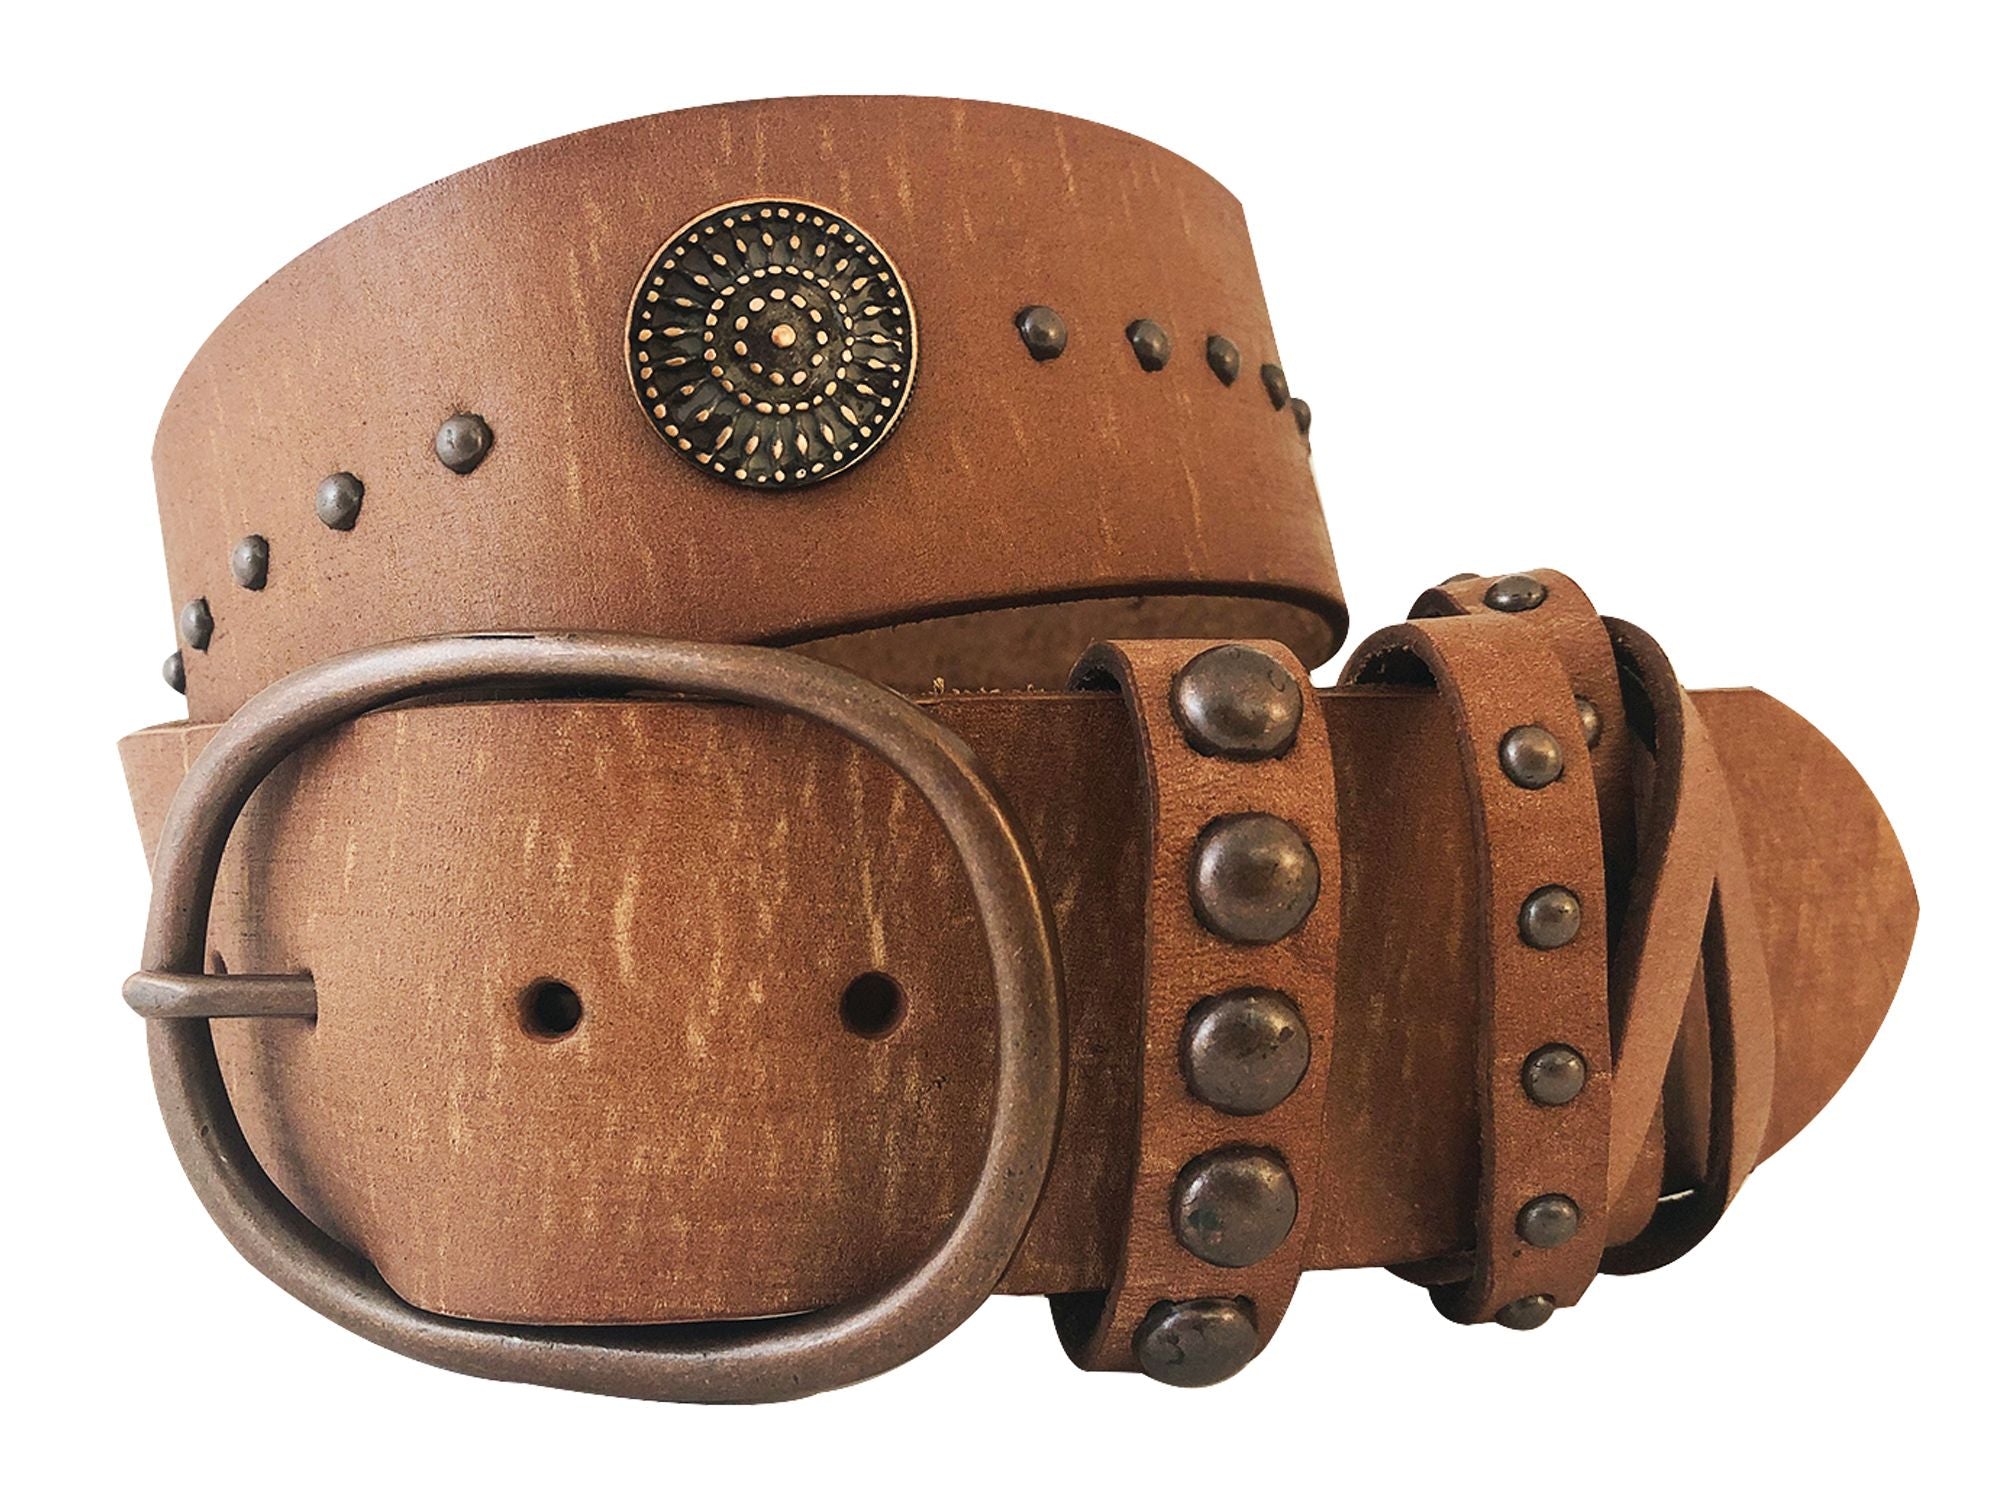 Roper Wms Belt 2In Genuine Leather Brown Embossed - Clearance